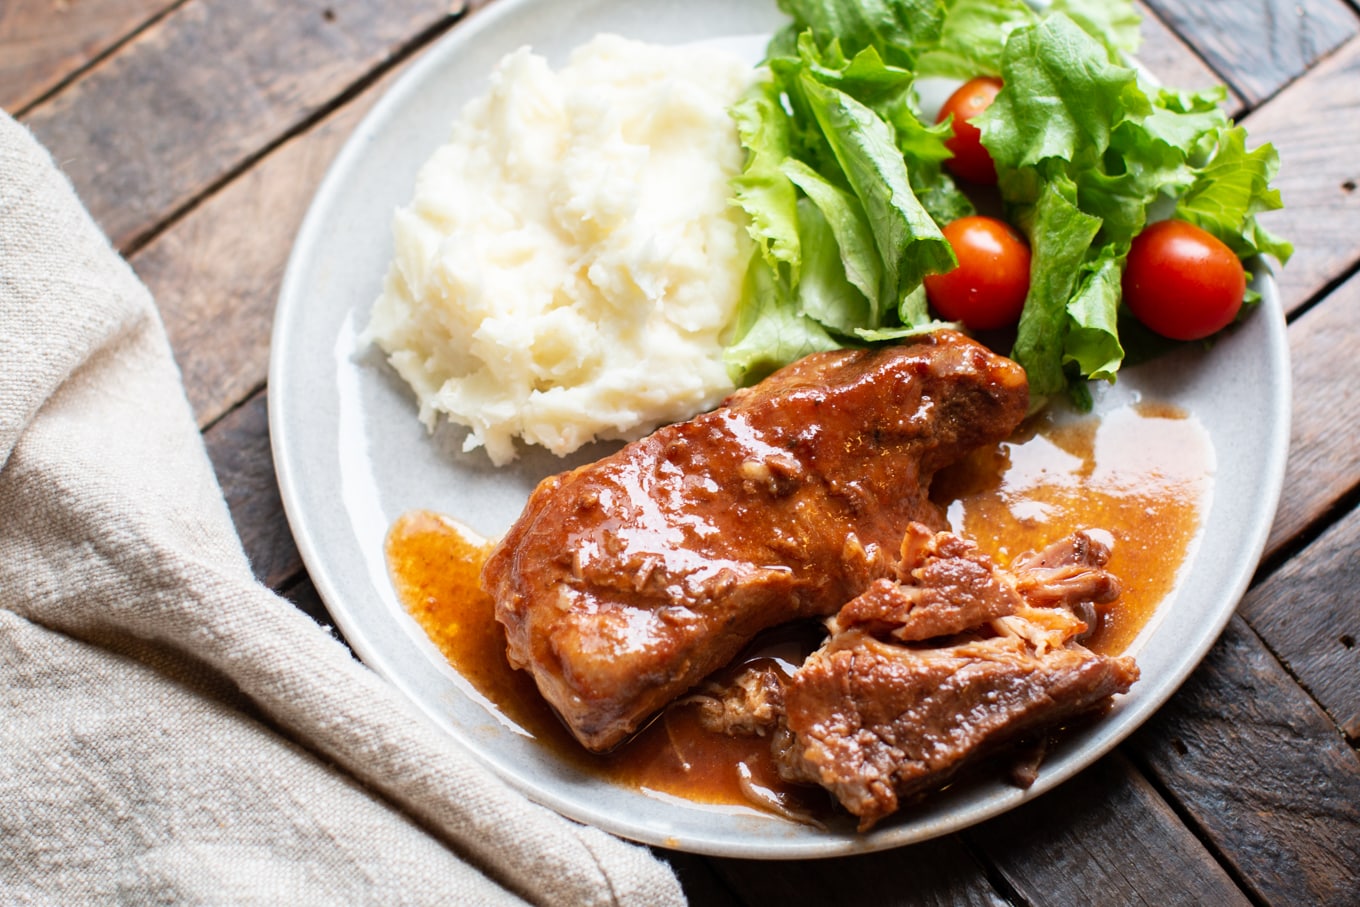 sweet and sour ribs with mashed potatoes and green salad.